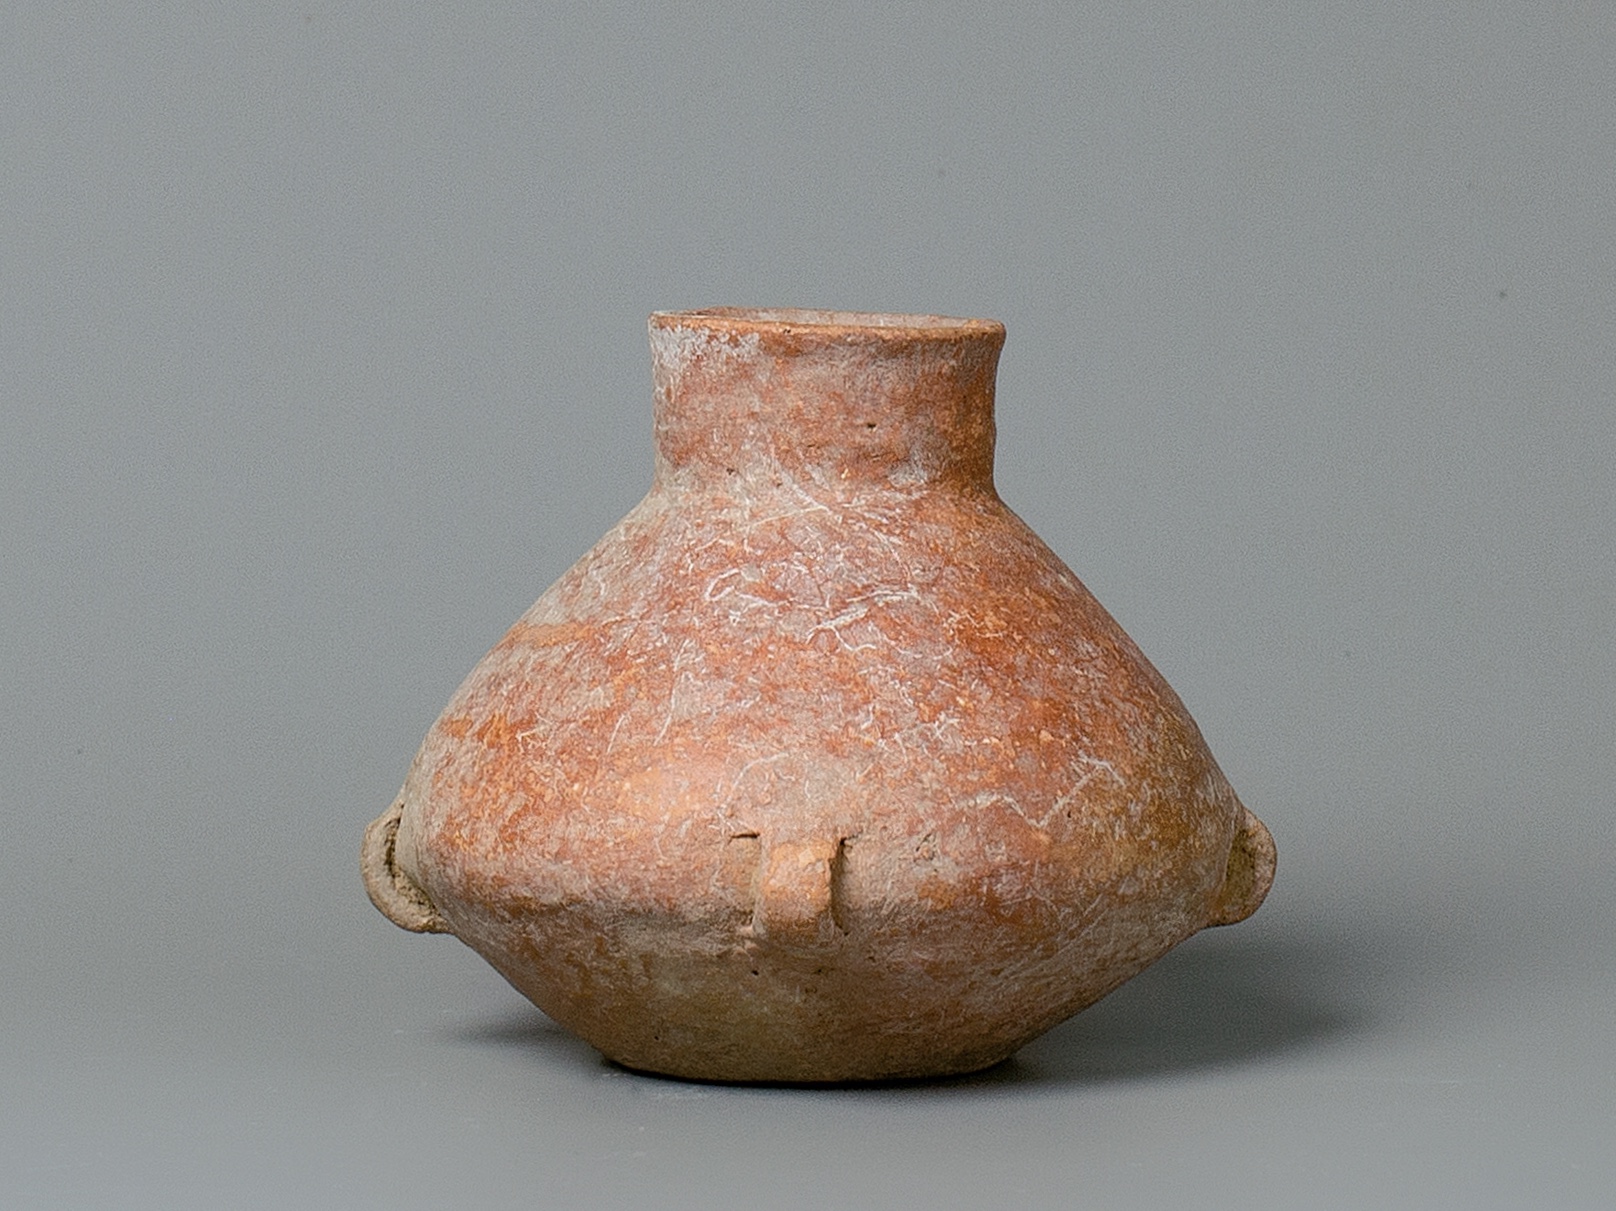 A Red Pottery Vase With Small Handles, Hongshan Culture (4500-3000 Bc)